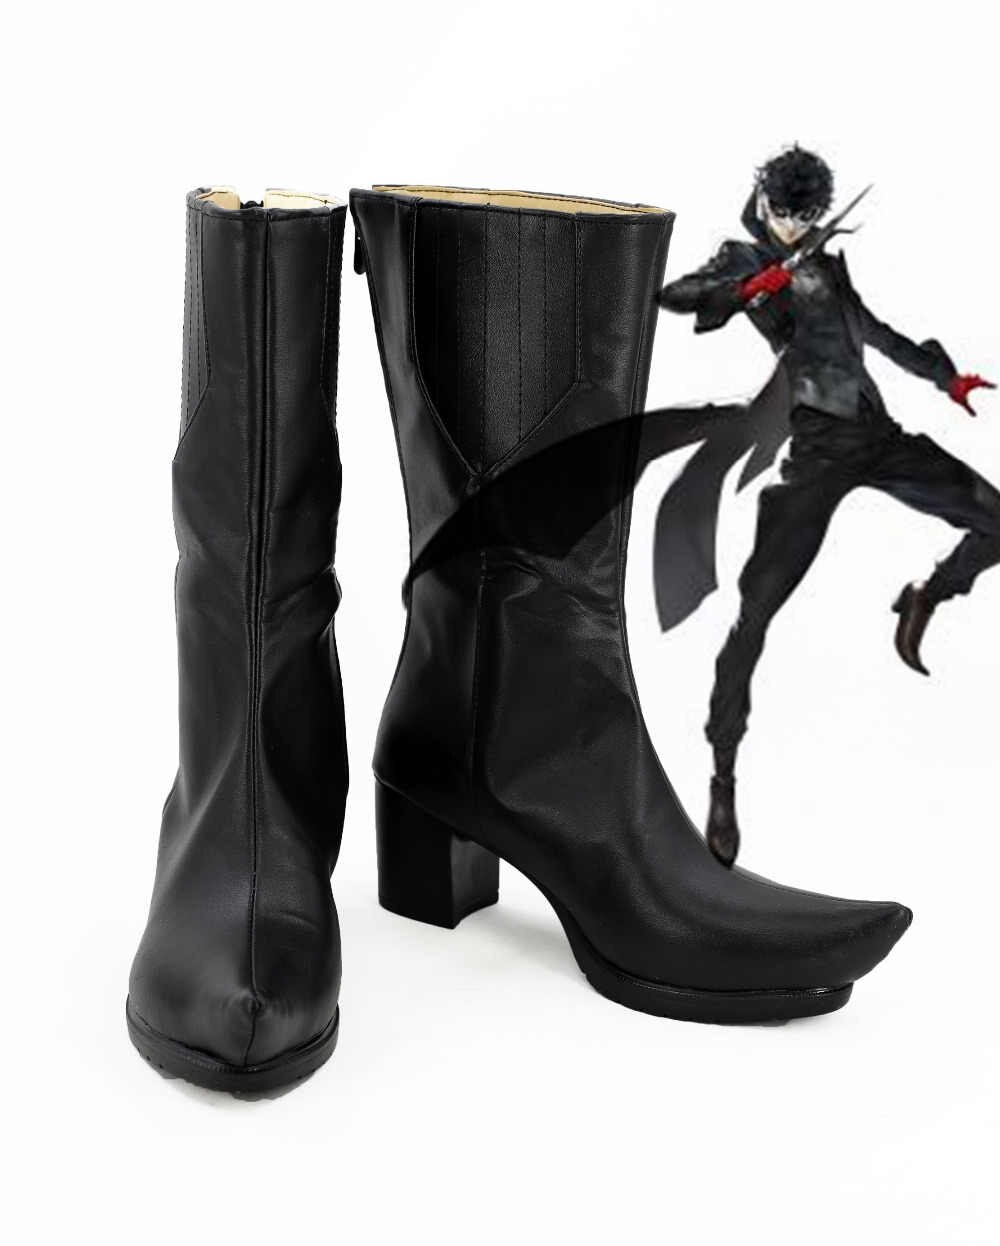 Persona 5 Joker Boots Cosplay Shoes